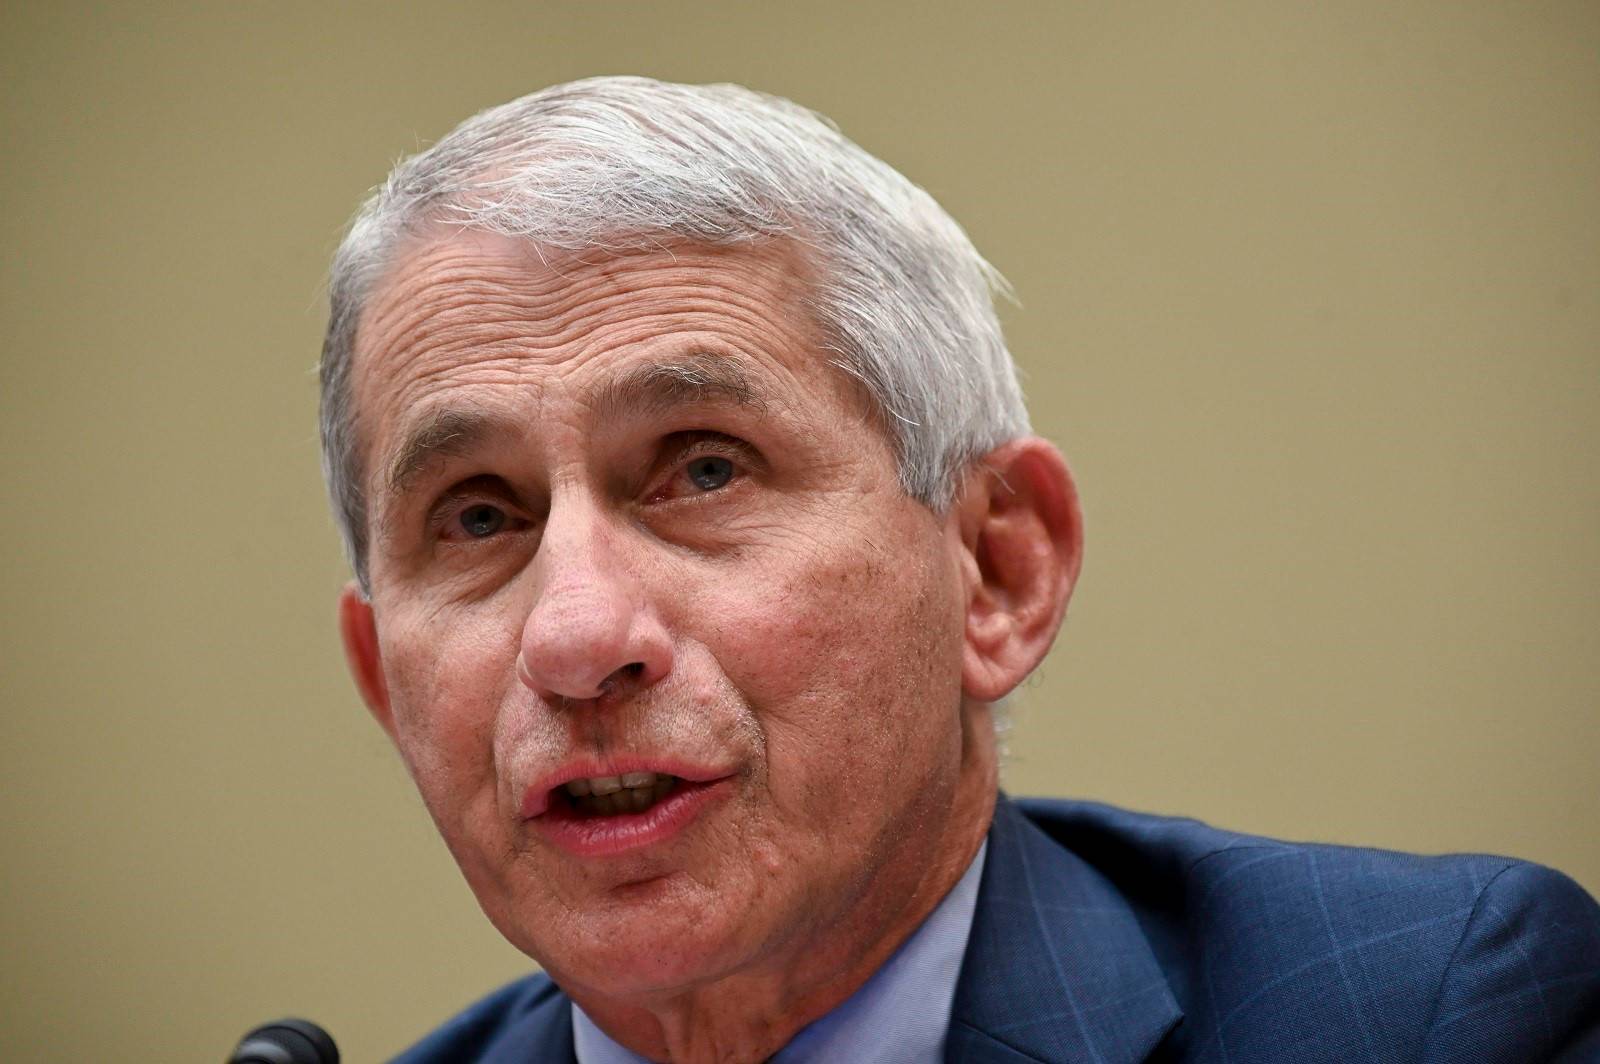 Dr. Fauci upright mentioned something everyone needs to listen to